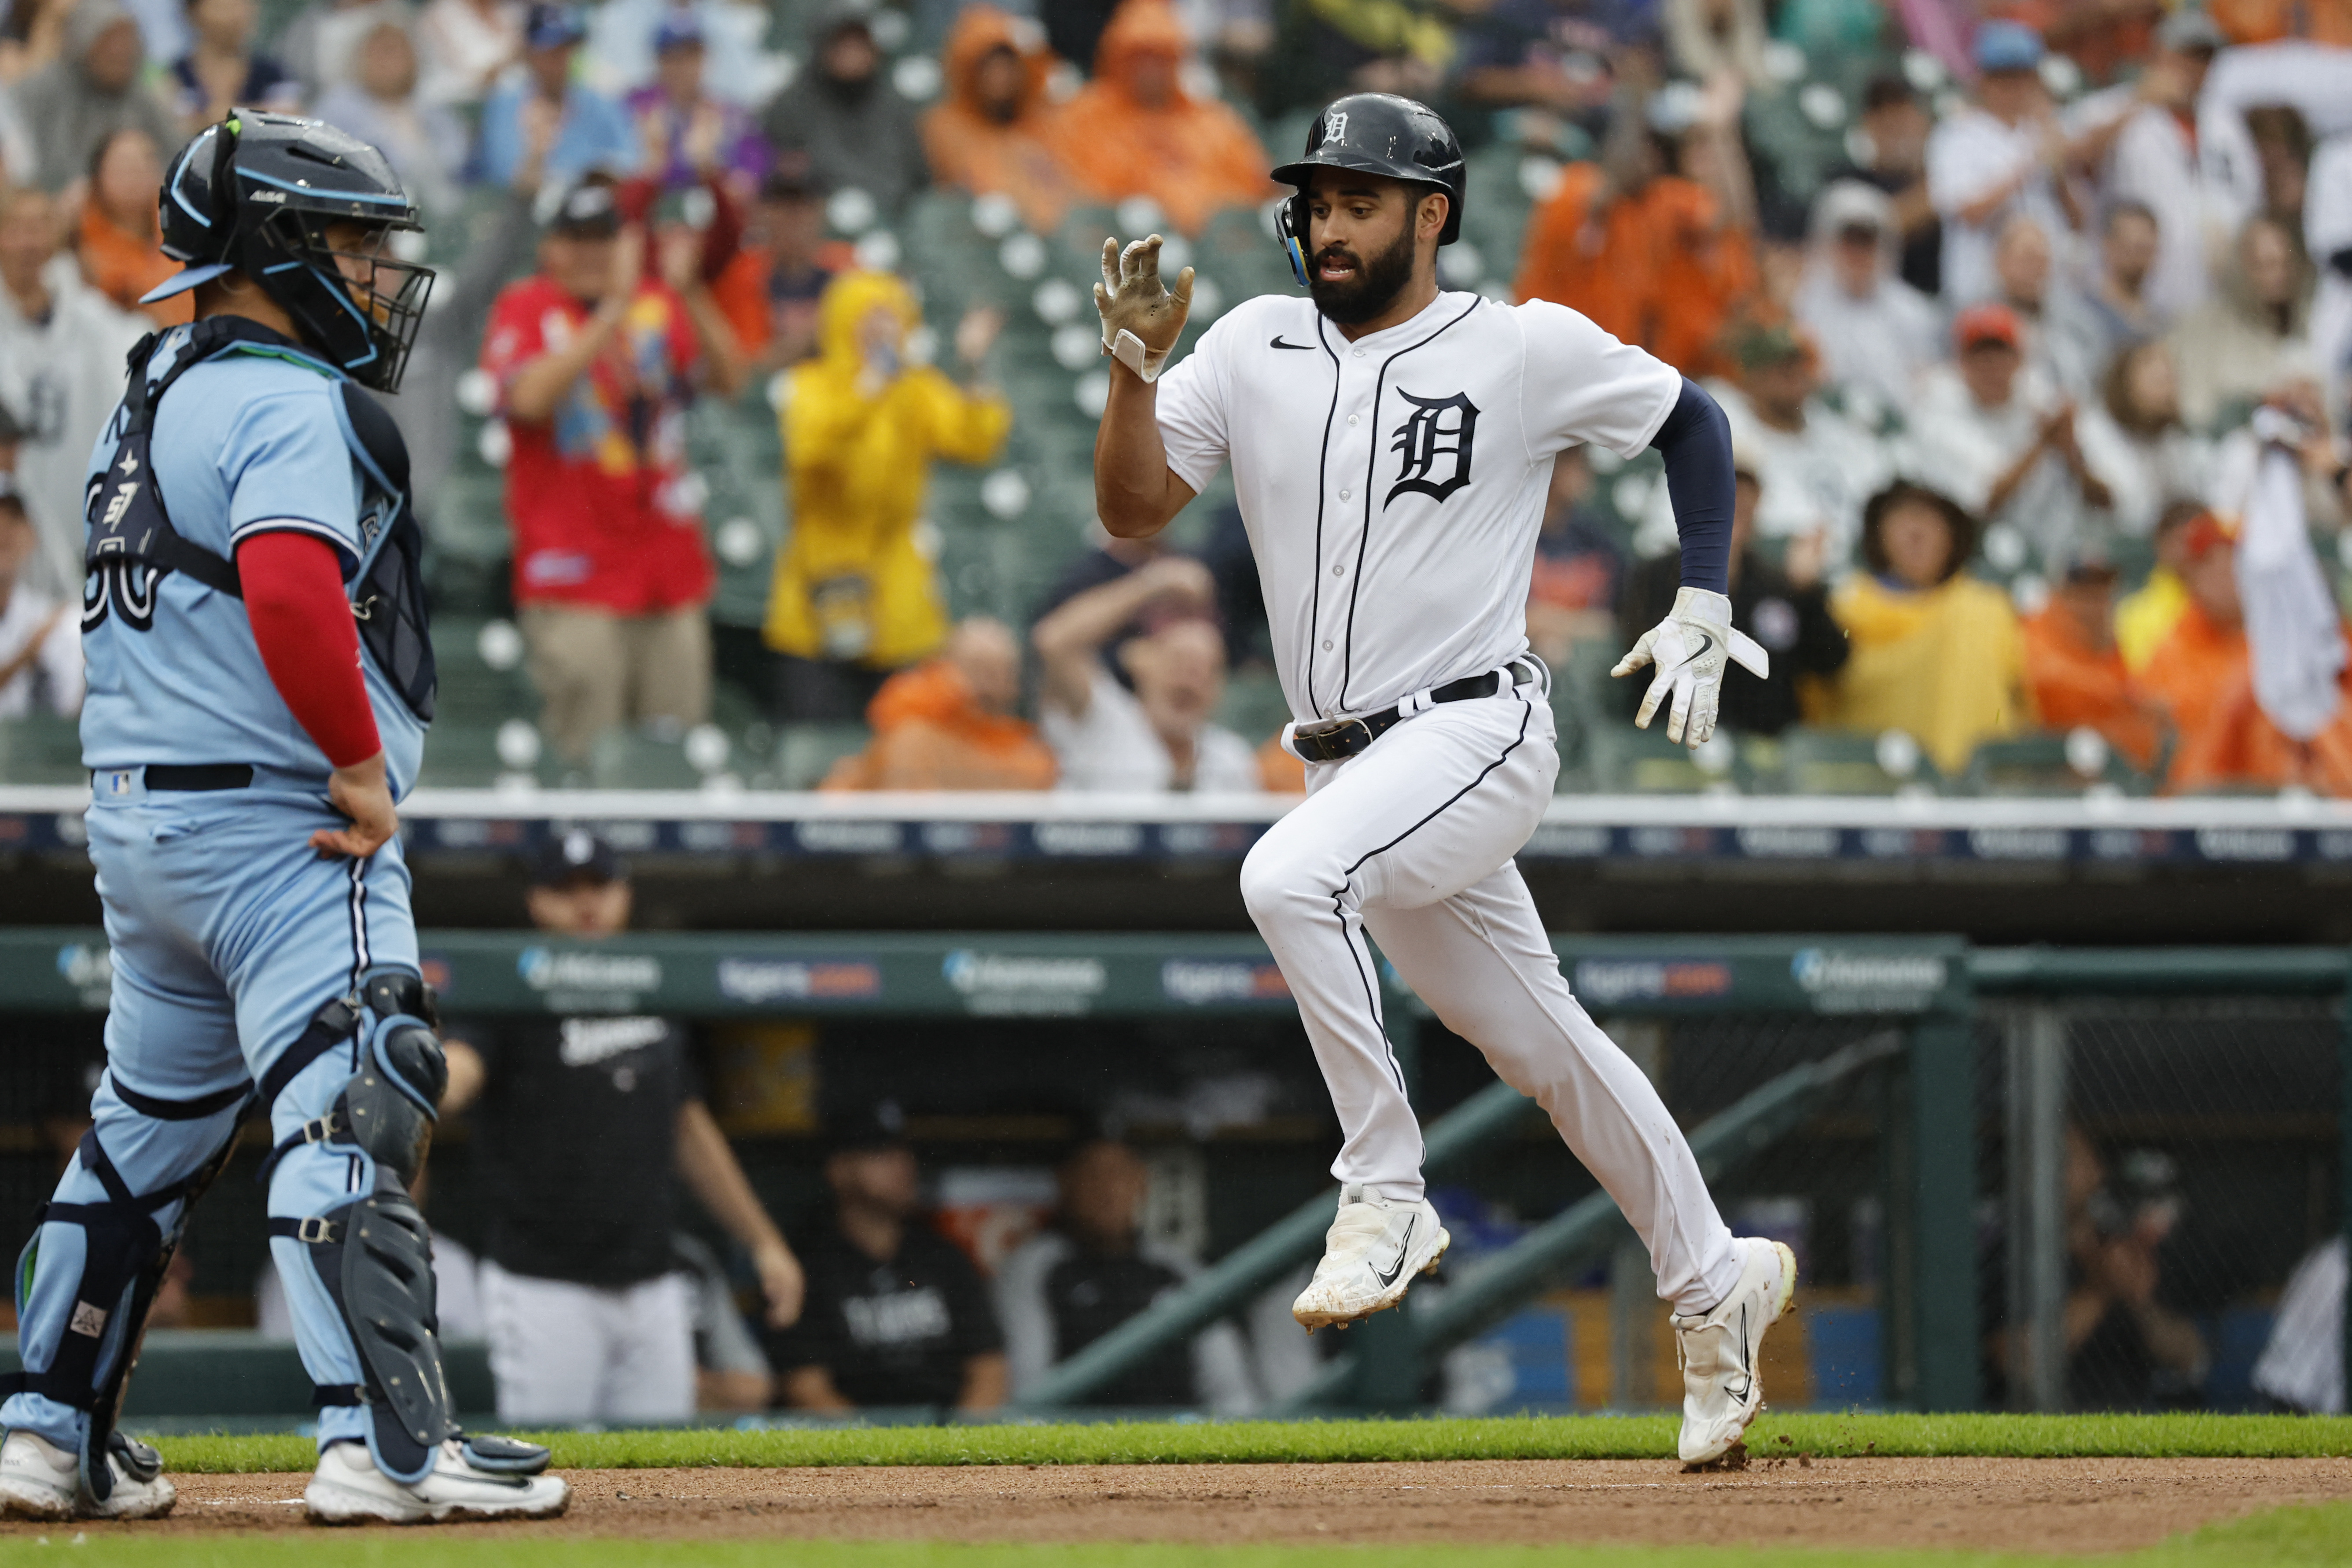 Tigers have a combined no-hitter against Blue Jays through 8